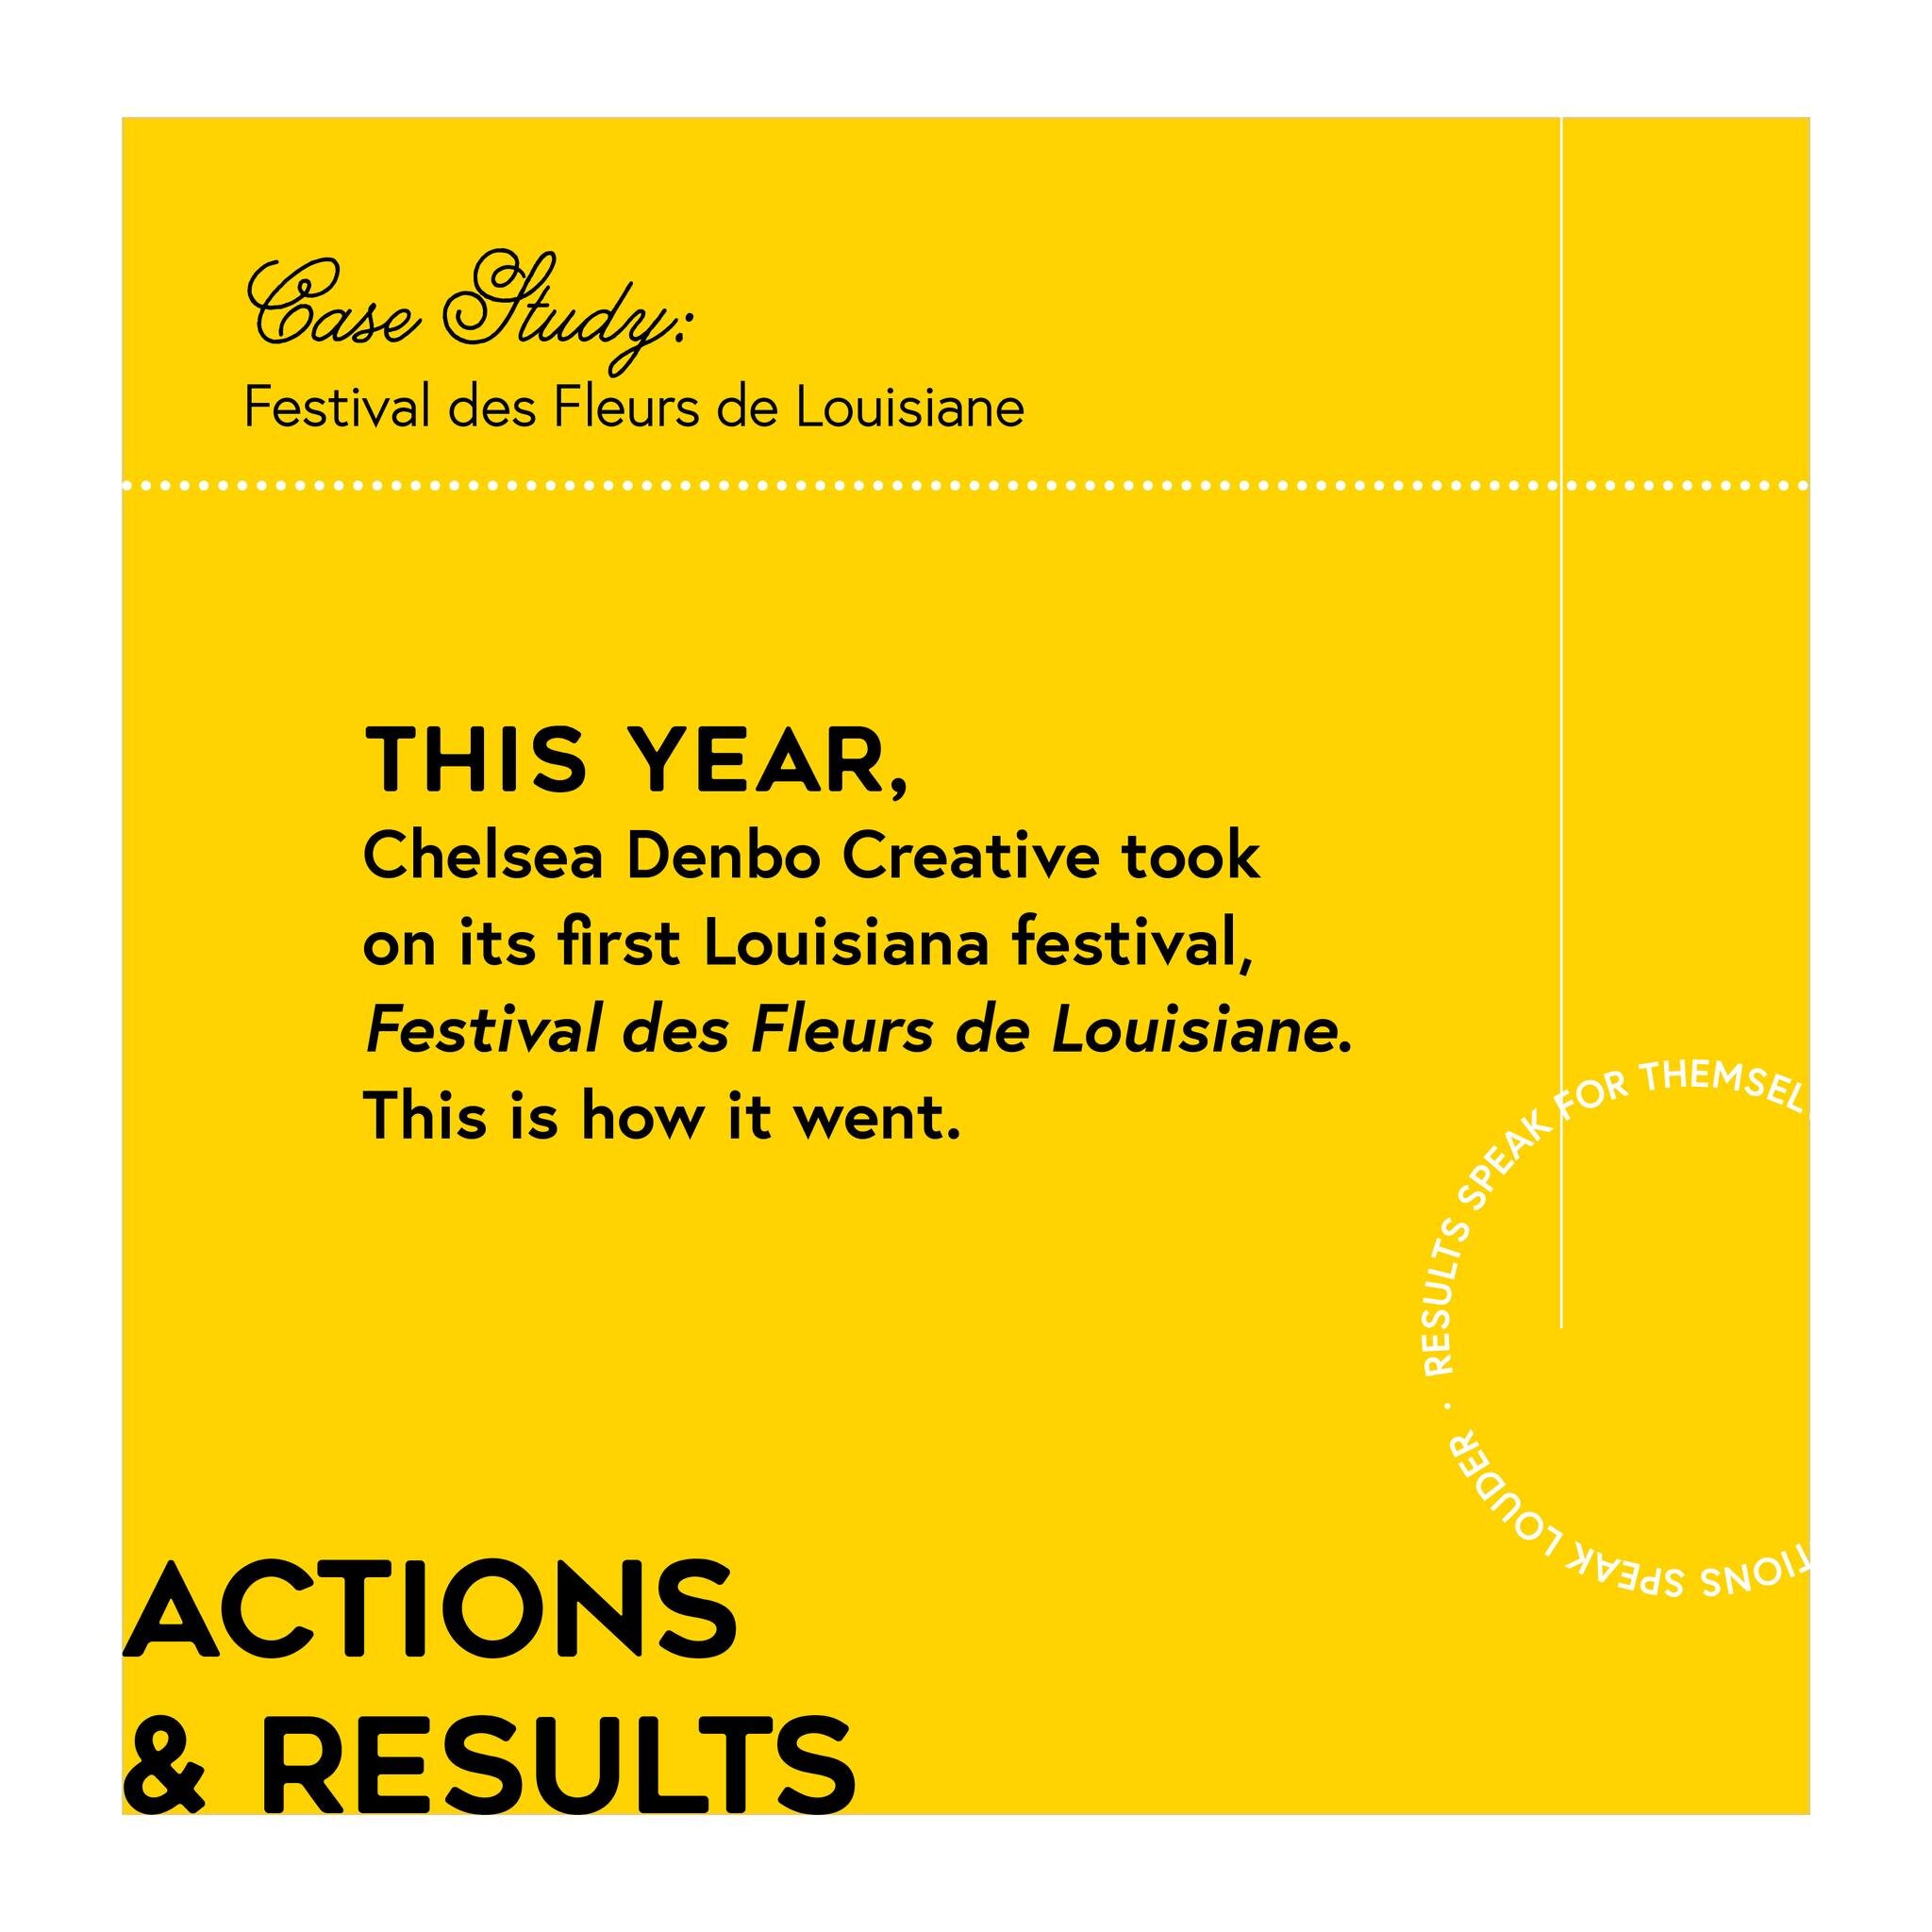 Actions speak louder. Results speak for themselves. 

This year, Chelsea Denbo Creative took on its first Louisiana festival, 
Festival des Fleurs de Louisiane. This is how it went.

Looking for help with your business or event? Let's work together! 